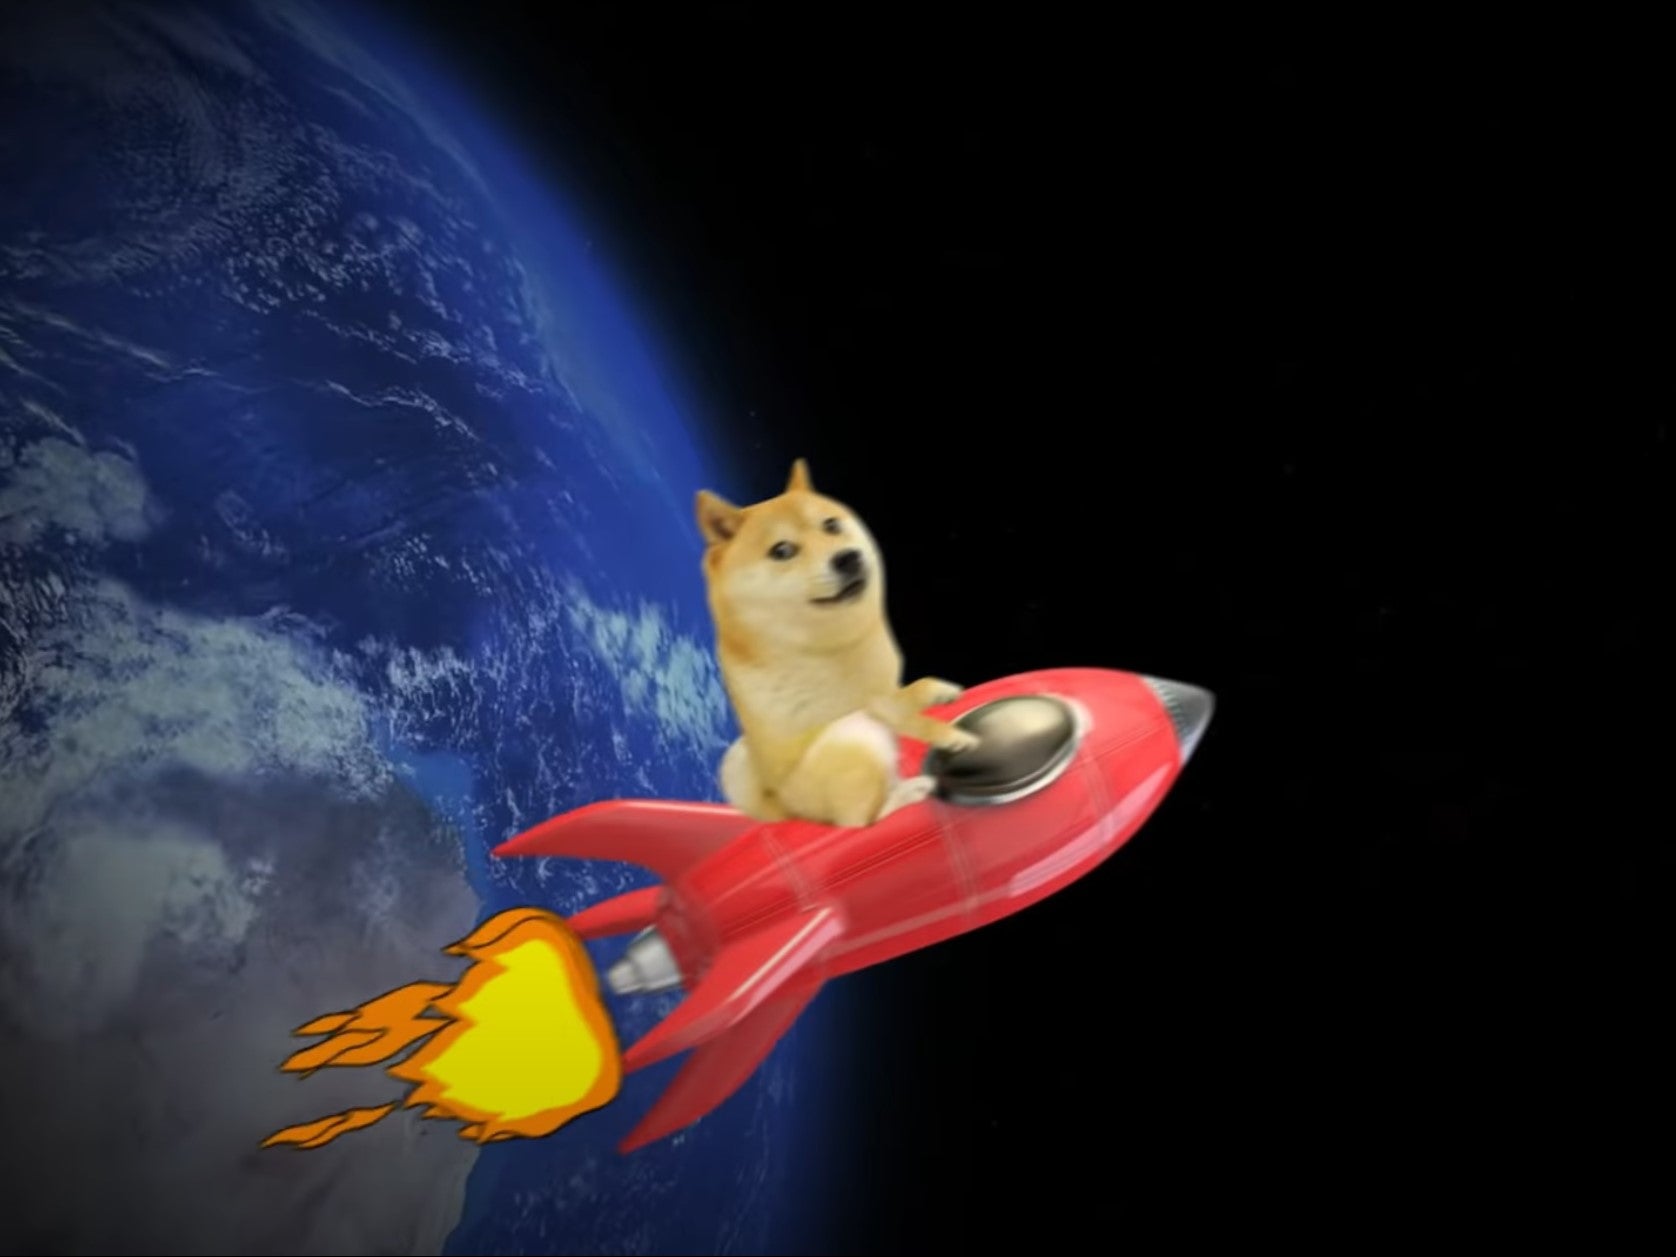 Elon Musk said he would use SpaceX to send dogecoin into space, sharing the meme video ‘To the moon’ by Herr Fuchs on Twitter